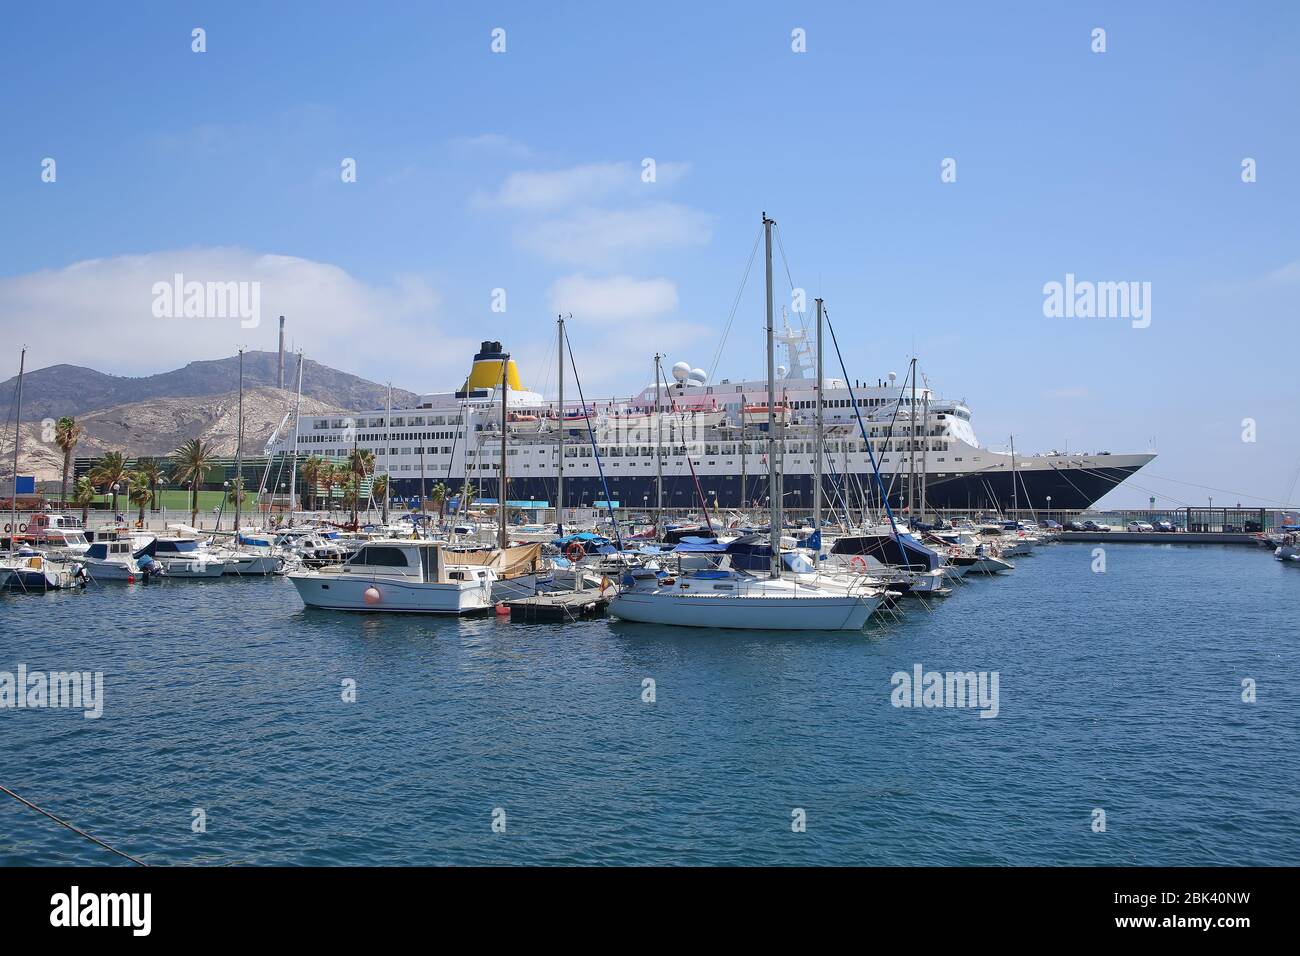 The marina & cruise port of Cartagena lies on the coast of Murcia in south-east Spain. Stock Photo